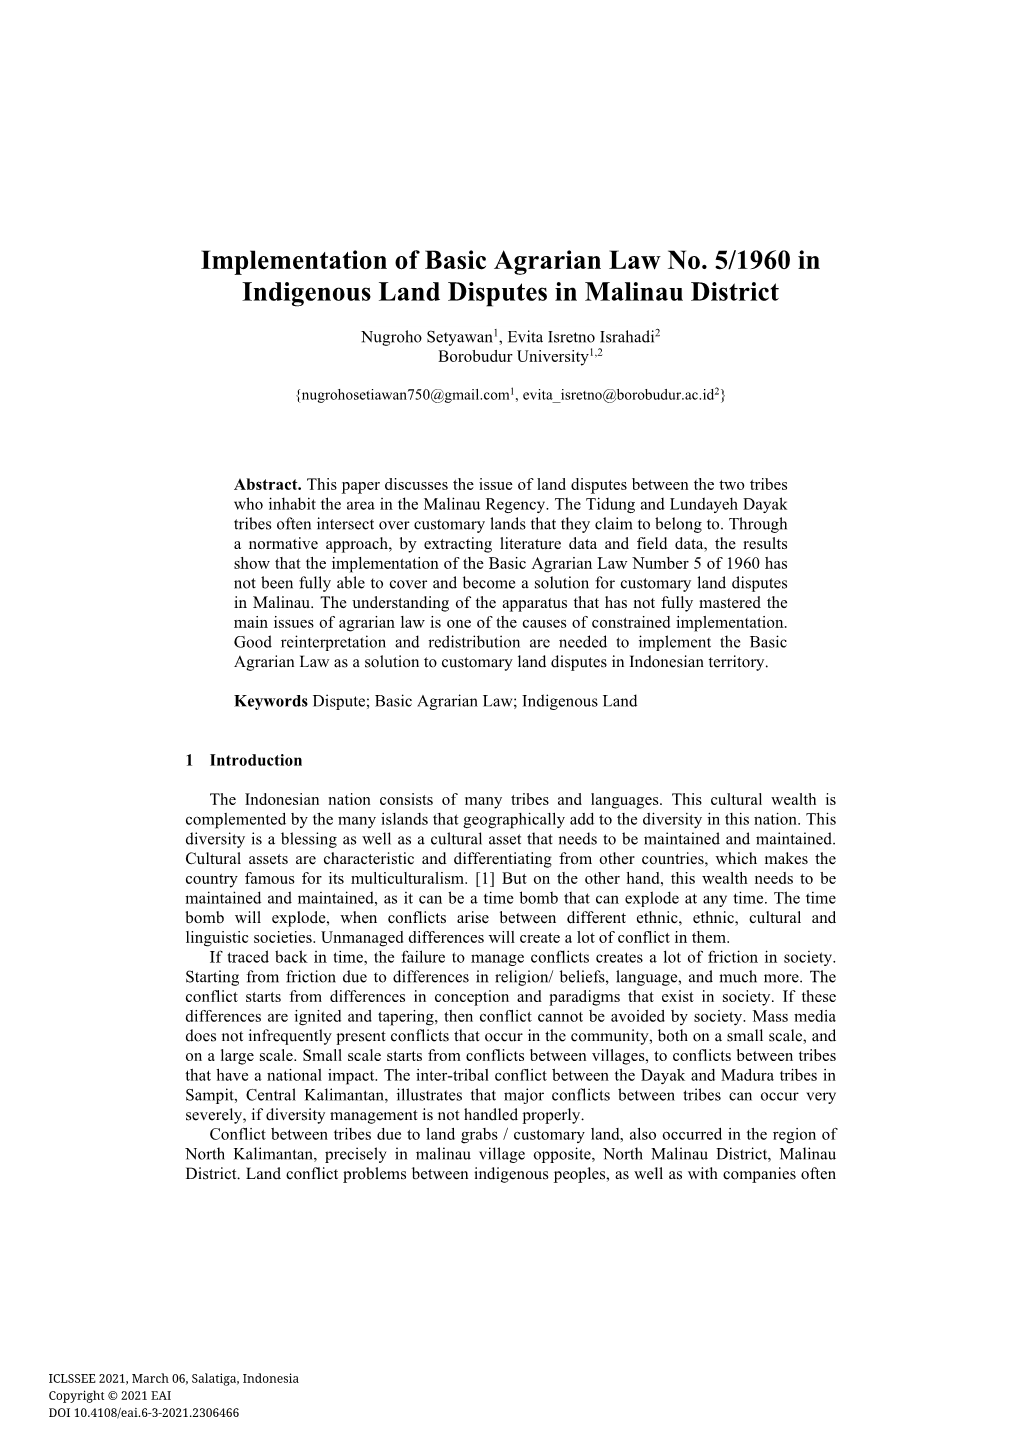 Implementation of Basic Agrarian Law No. 5/1960 in Indigenous Land Disputes in Malinau District